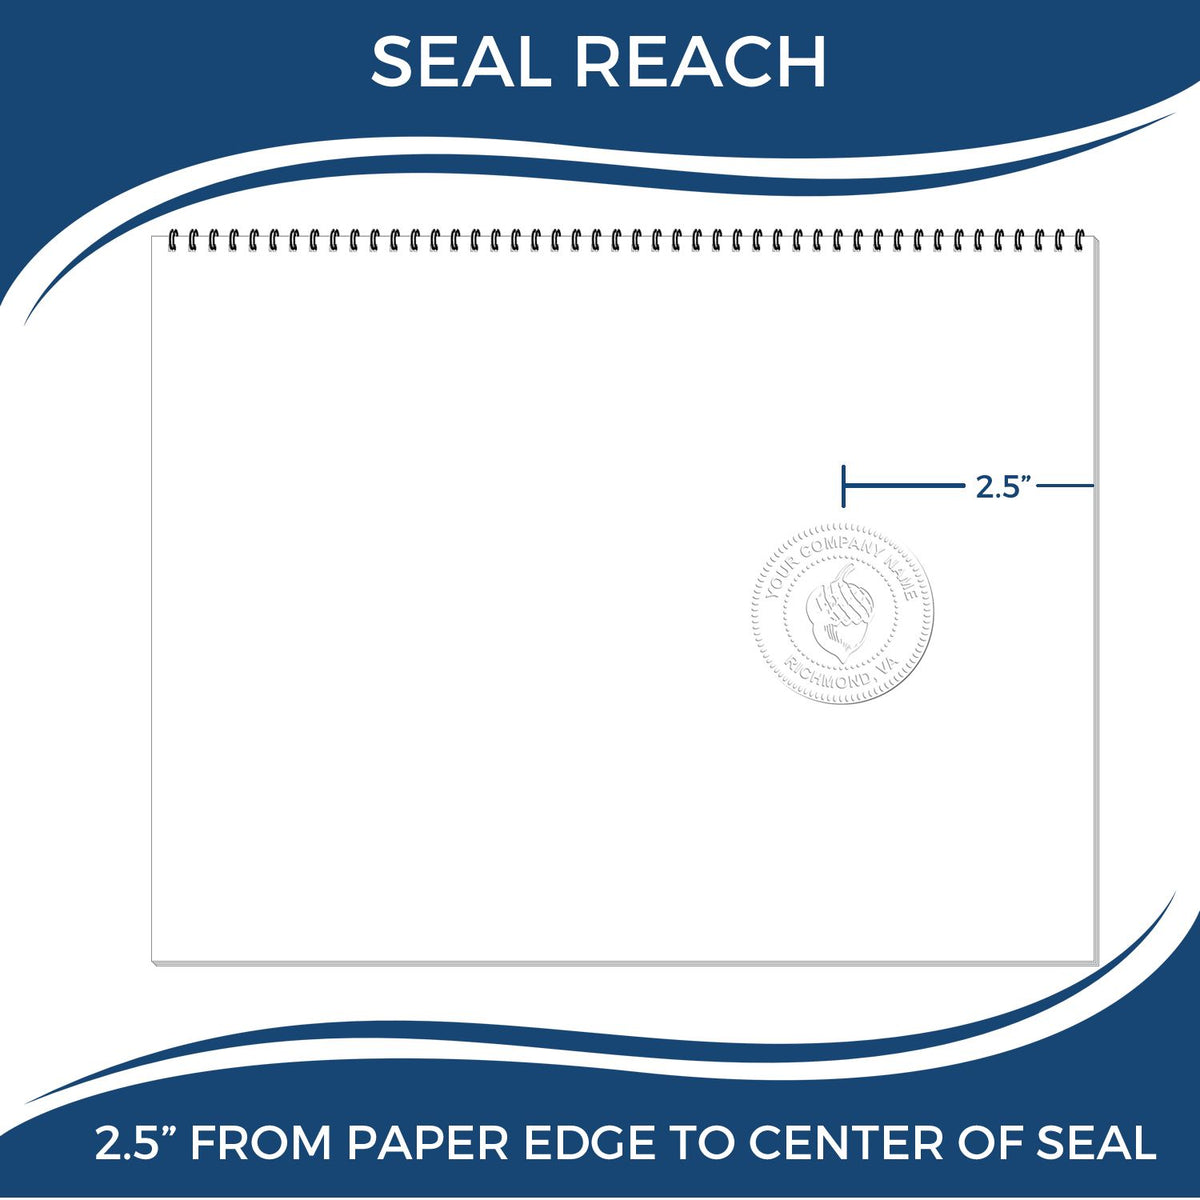 An infographic showing the seal reach which is represented by a ruler and a miniature seal image of the Heavy Duty Cast Iron Kentucky Land Surveyor Seal Embosser